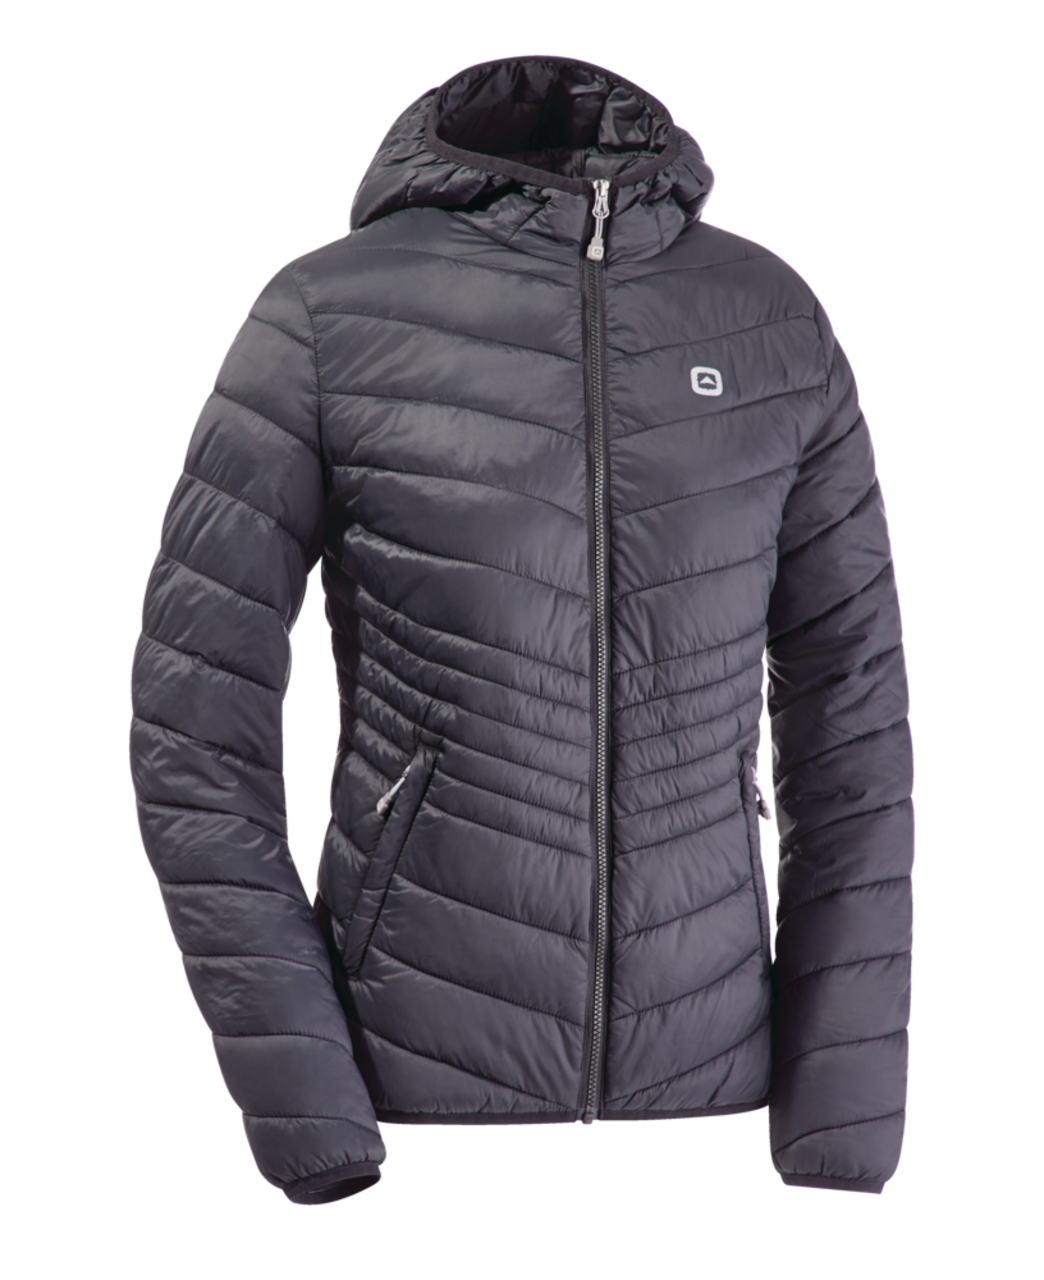 Outbound Women's Ramble Insulated Quilted Winter Parka Jacket Faux